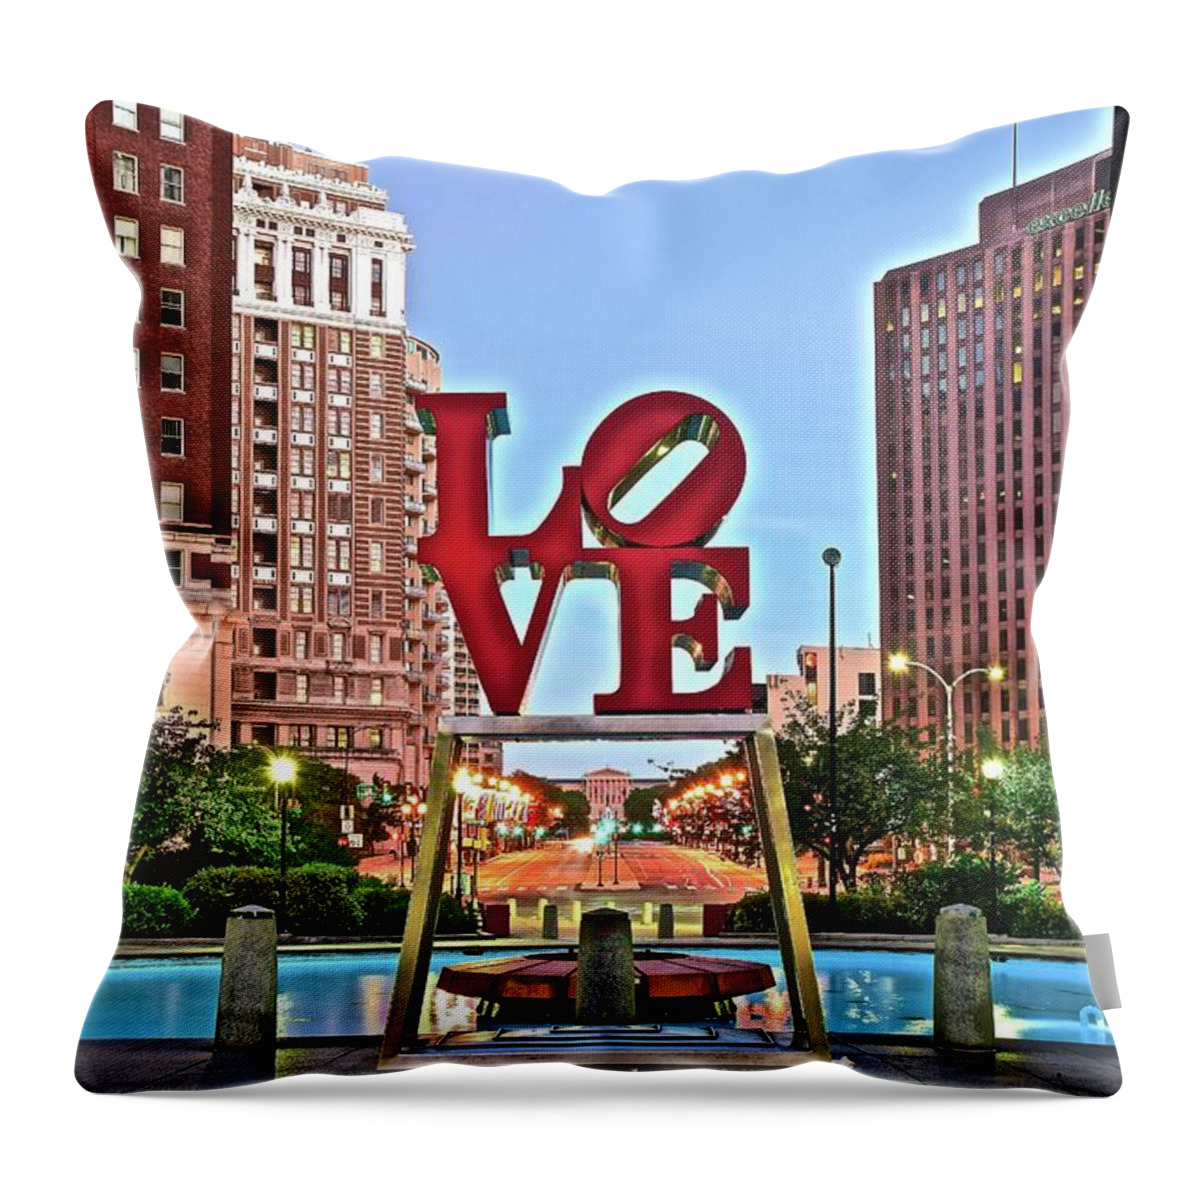 Love Throw Pillow featuring the photograph Lo Ve #1 by Frozen in Time Fine Art Photography